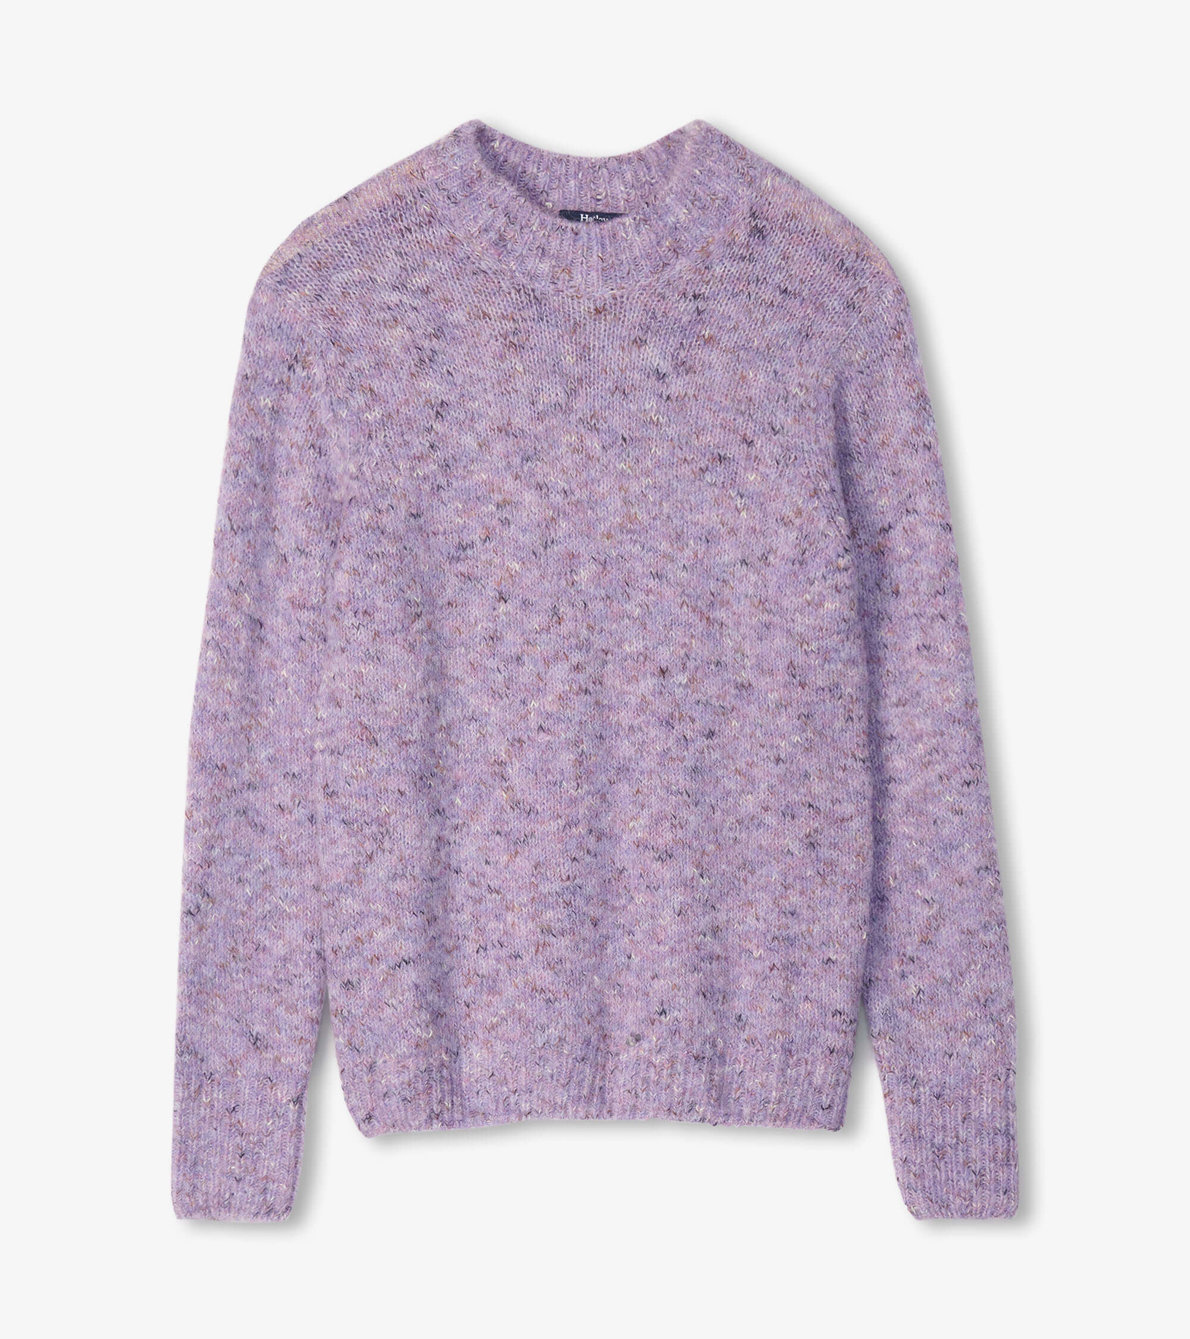 View larger image of Everywhere Jumper - Smokey Purple